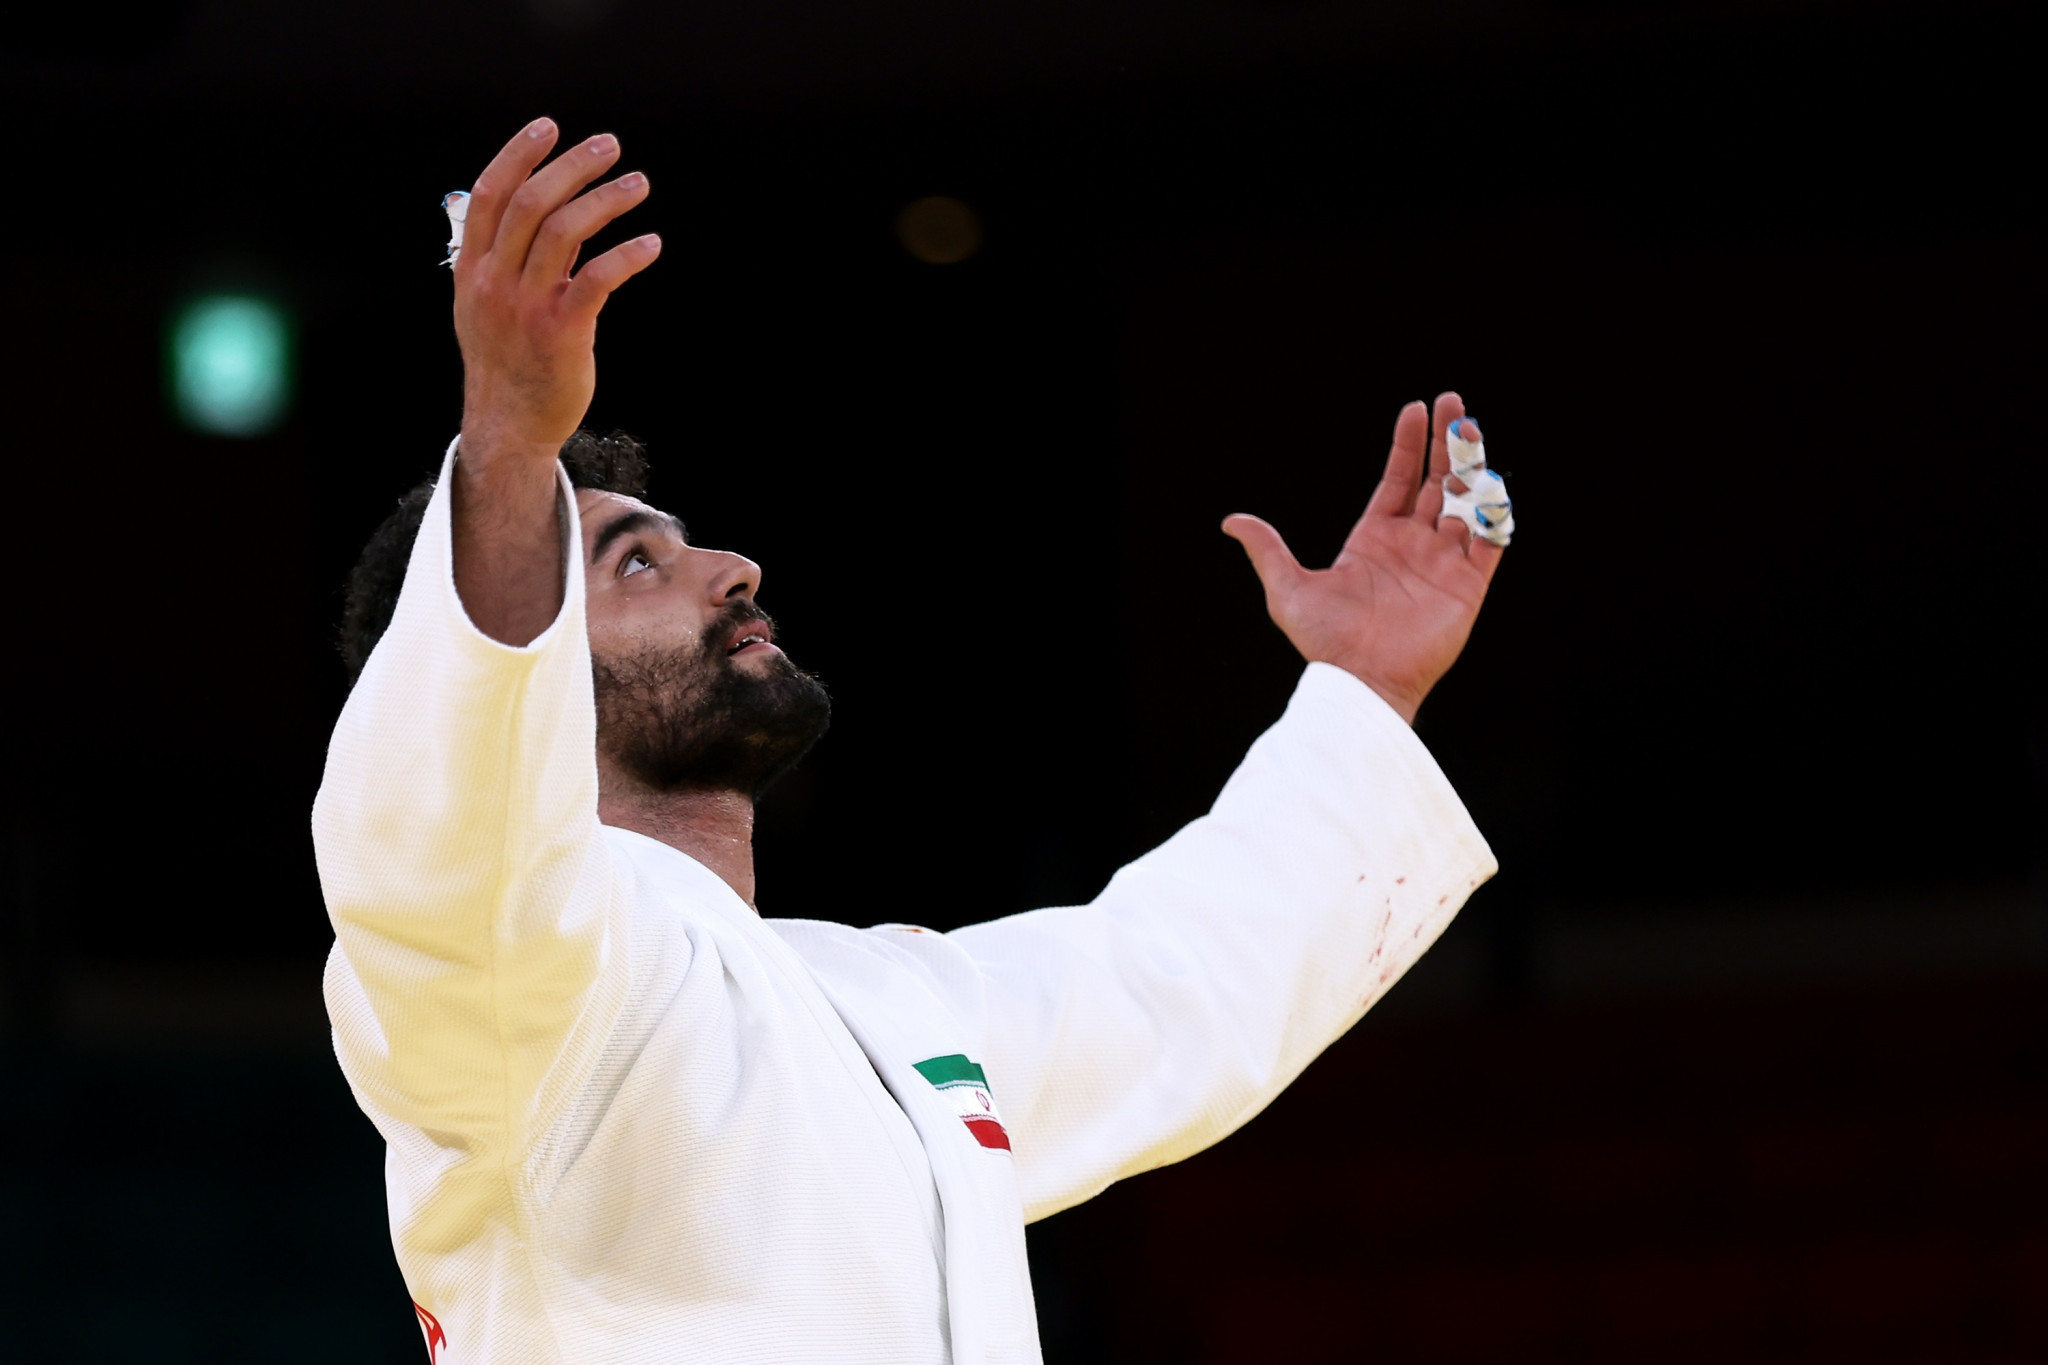 IJF President Marius Vizer has promised that Iran will be welcomed back when their four-year suspension from international judo ends later this year ©Getty Images